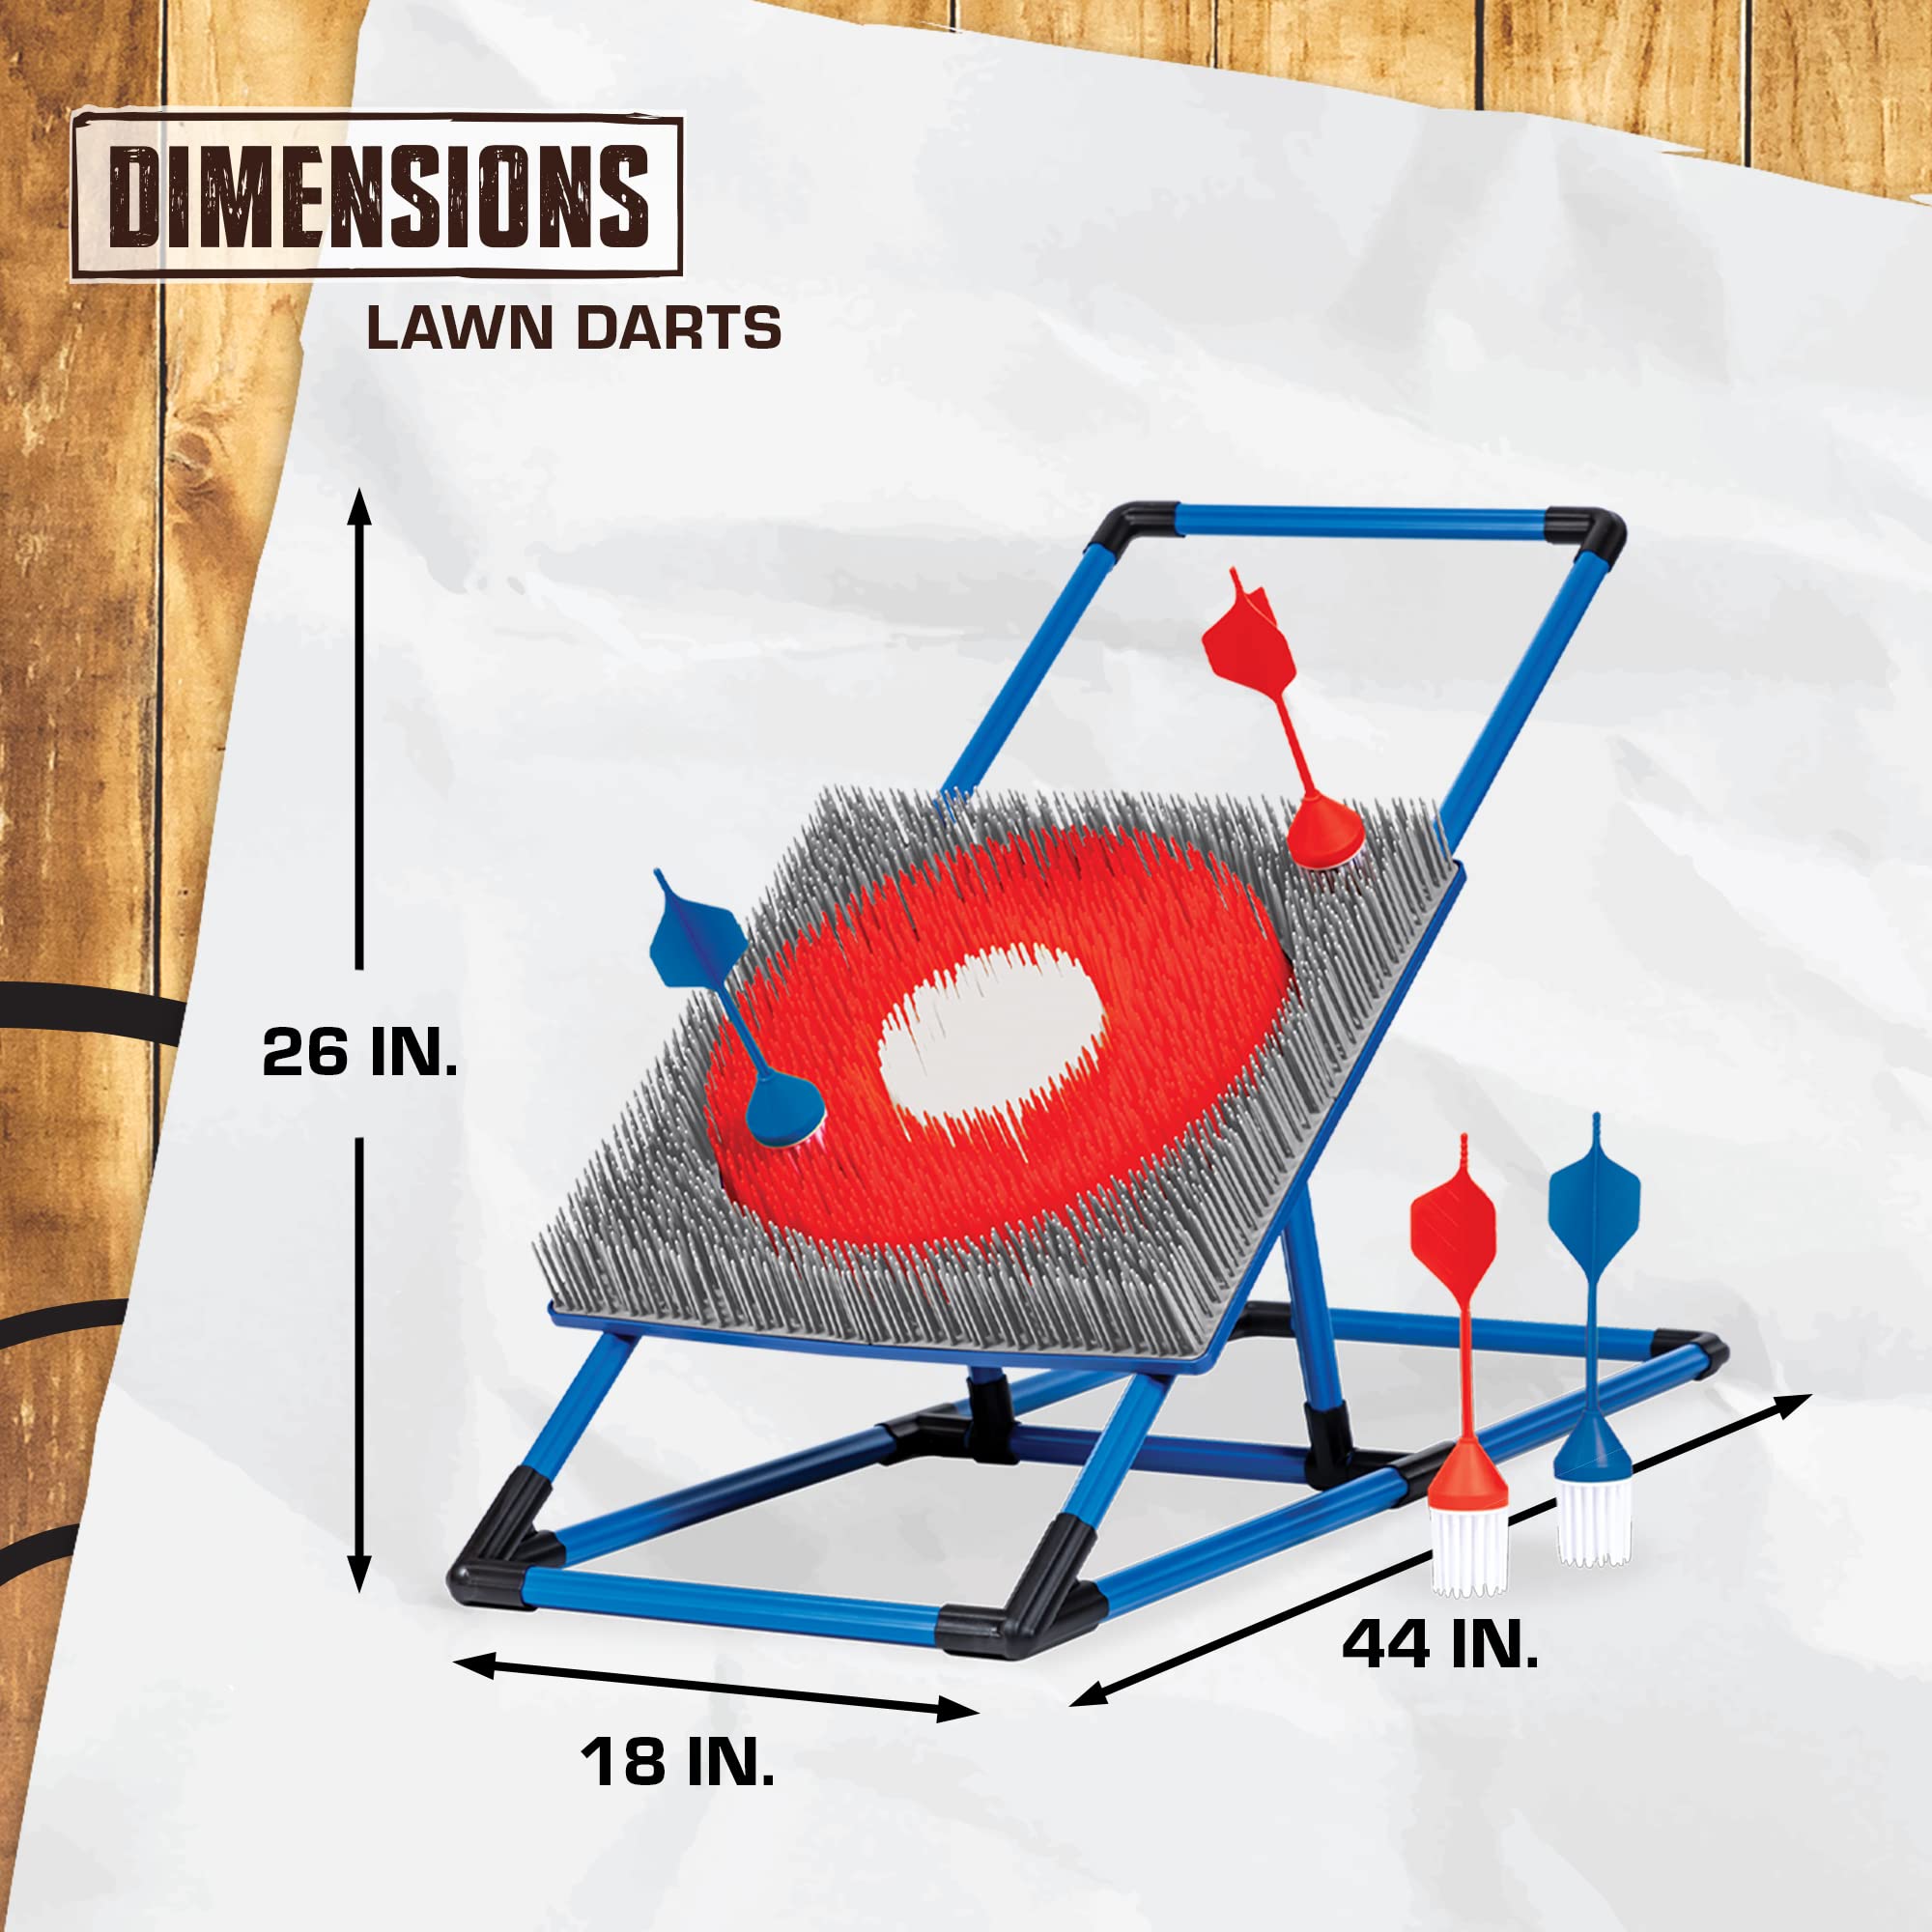 Eastpoint Axe Throw & Lawn Dart Target Sets - Bristle Axe Throwing Target & 2-in-1 Combo Backyard Game for Indoors and Outdoors